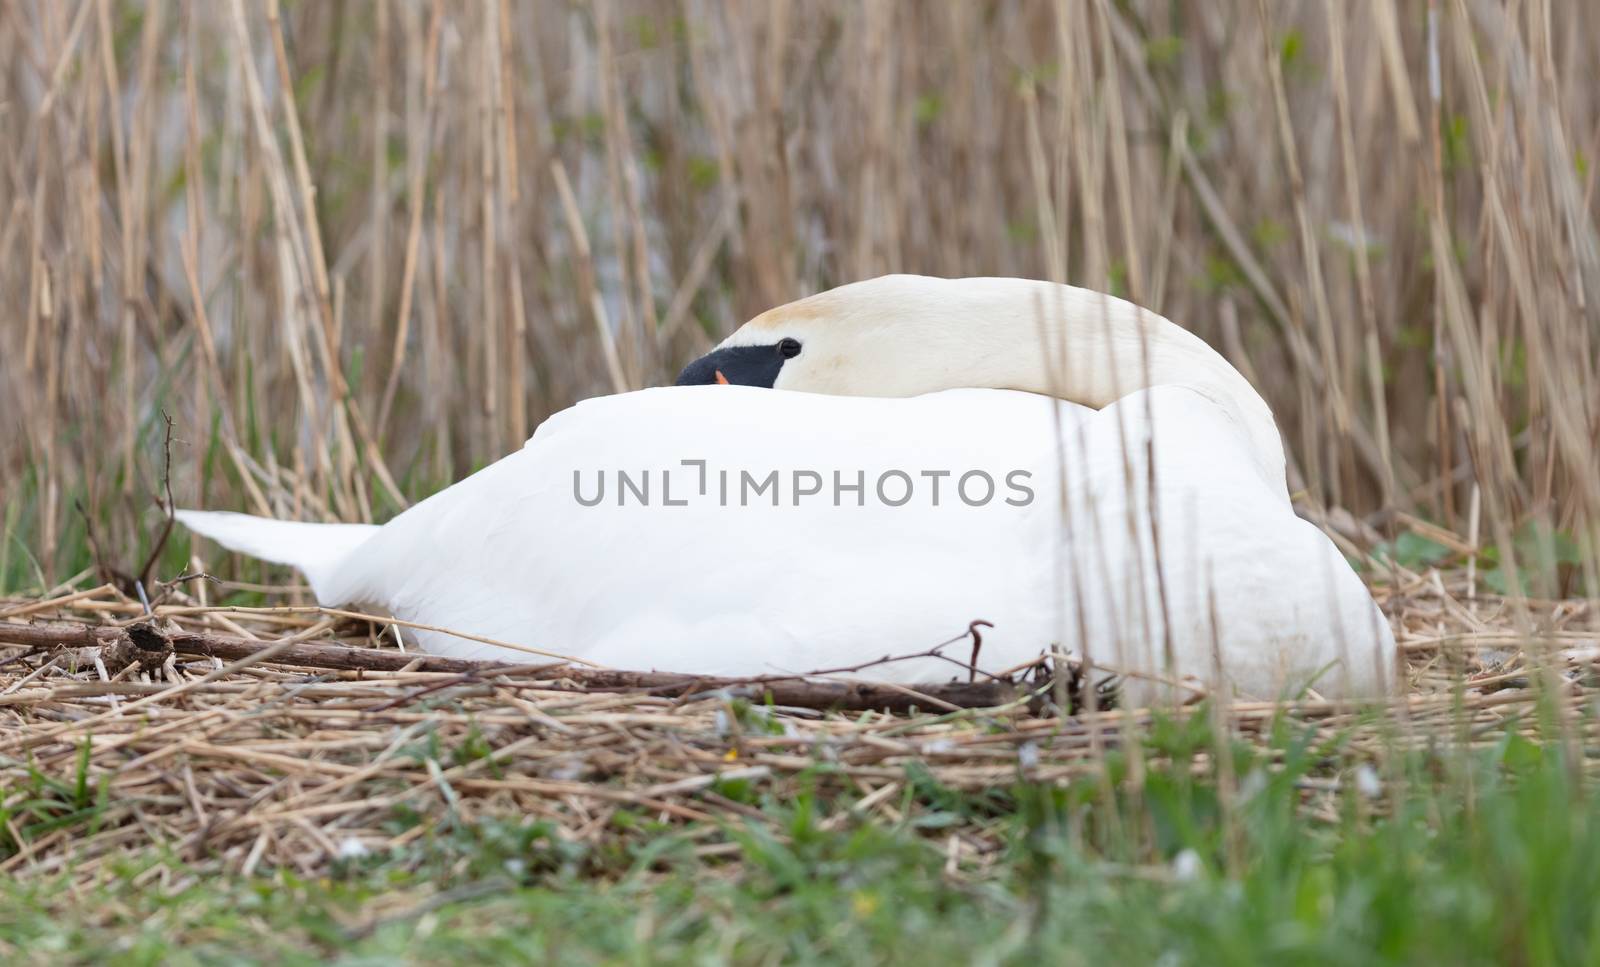 White swan on a nest by michaklootwijk